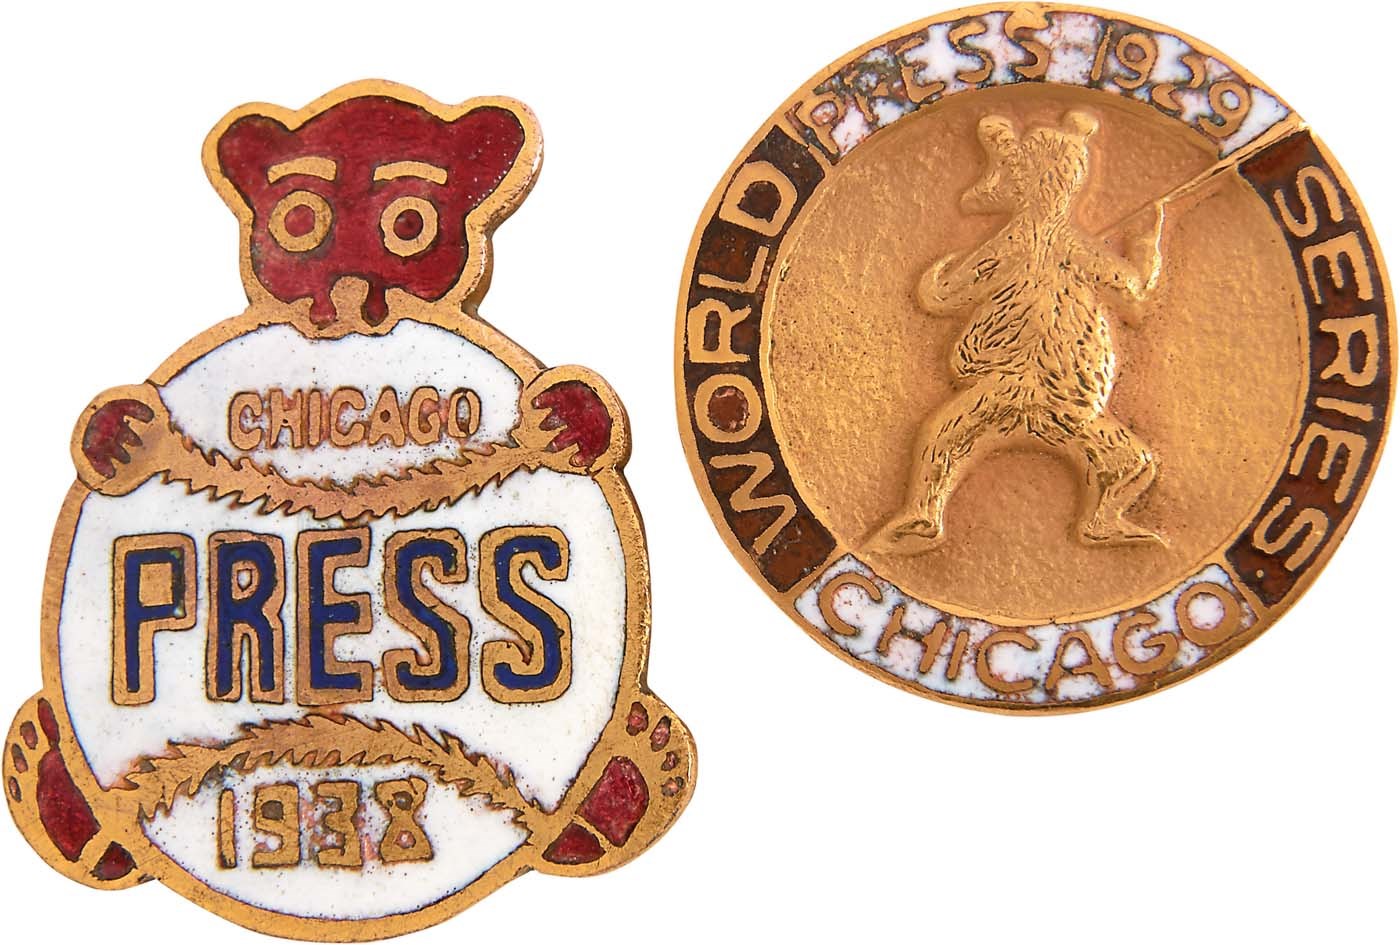 Chicago Cubs & Wrigley Field - 1929 and 1938 Chicago Cubs World Series Press Pins (2)